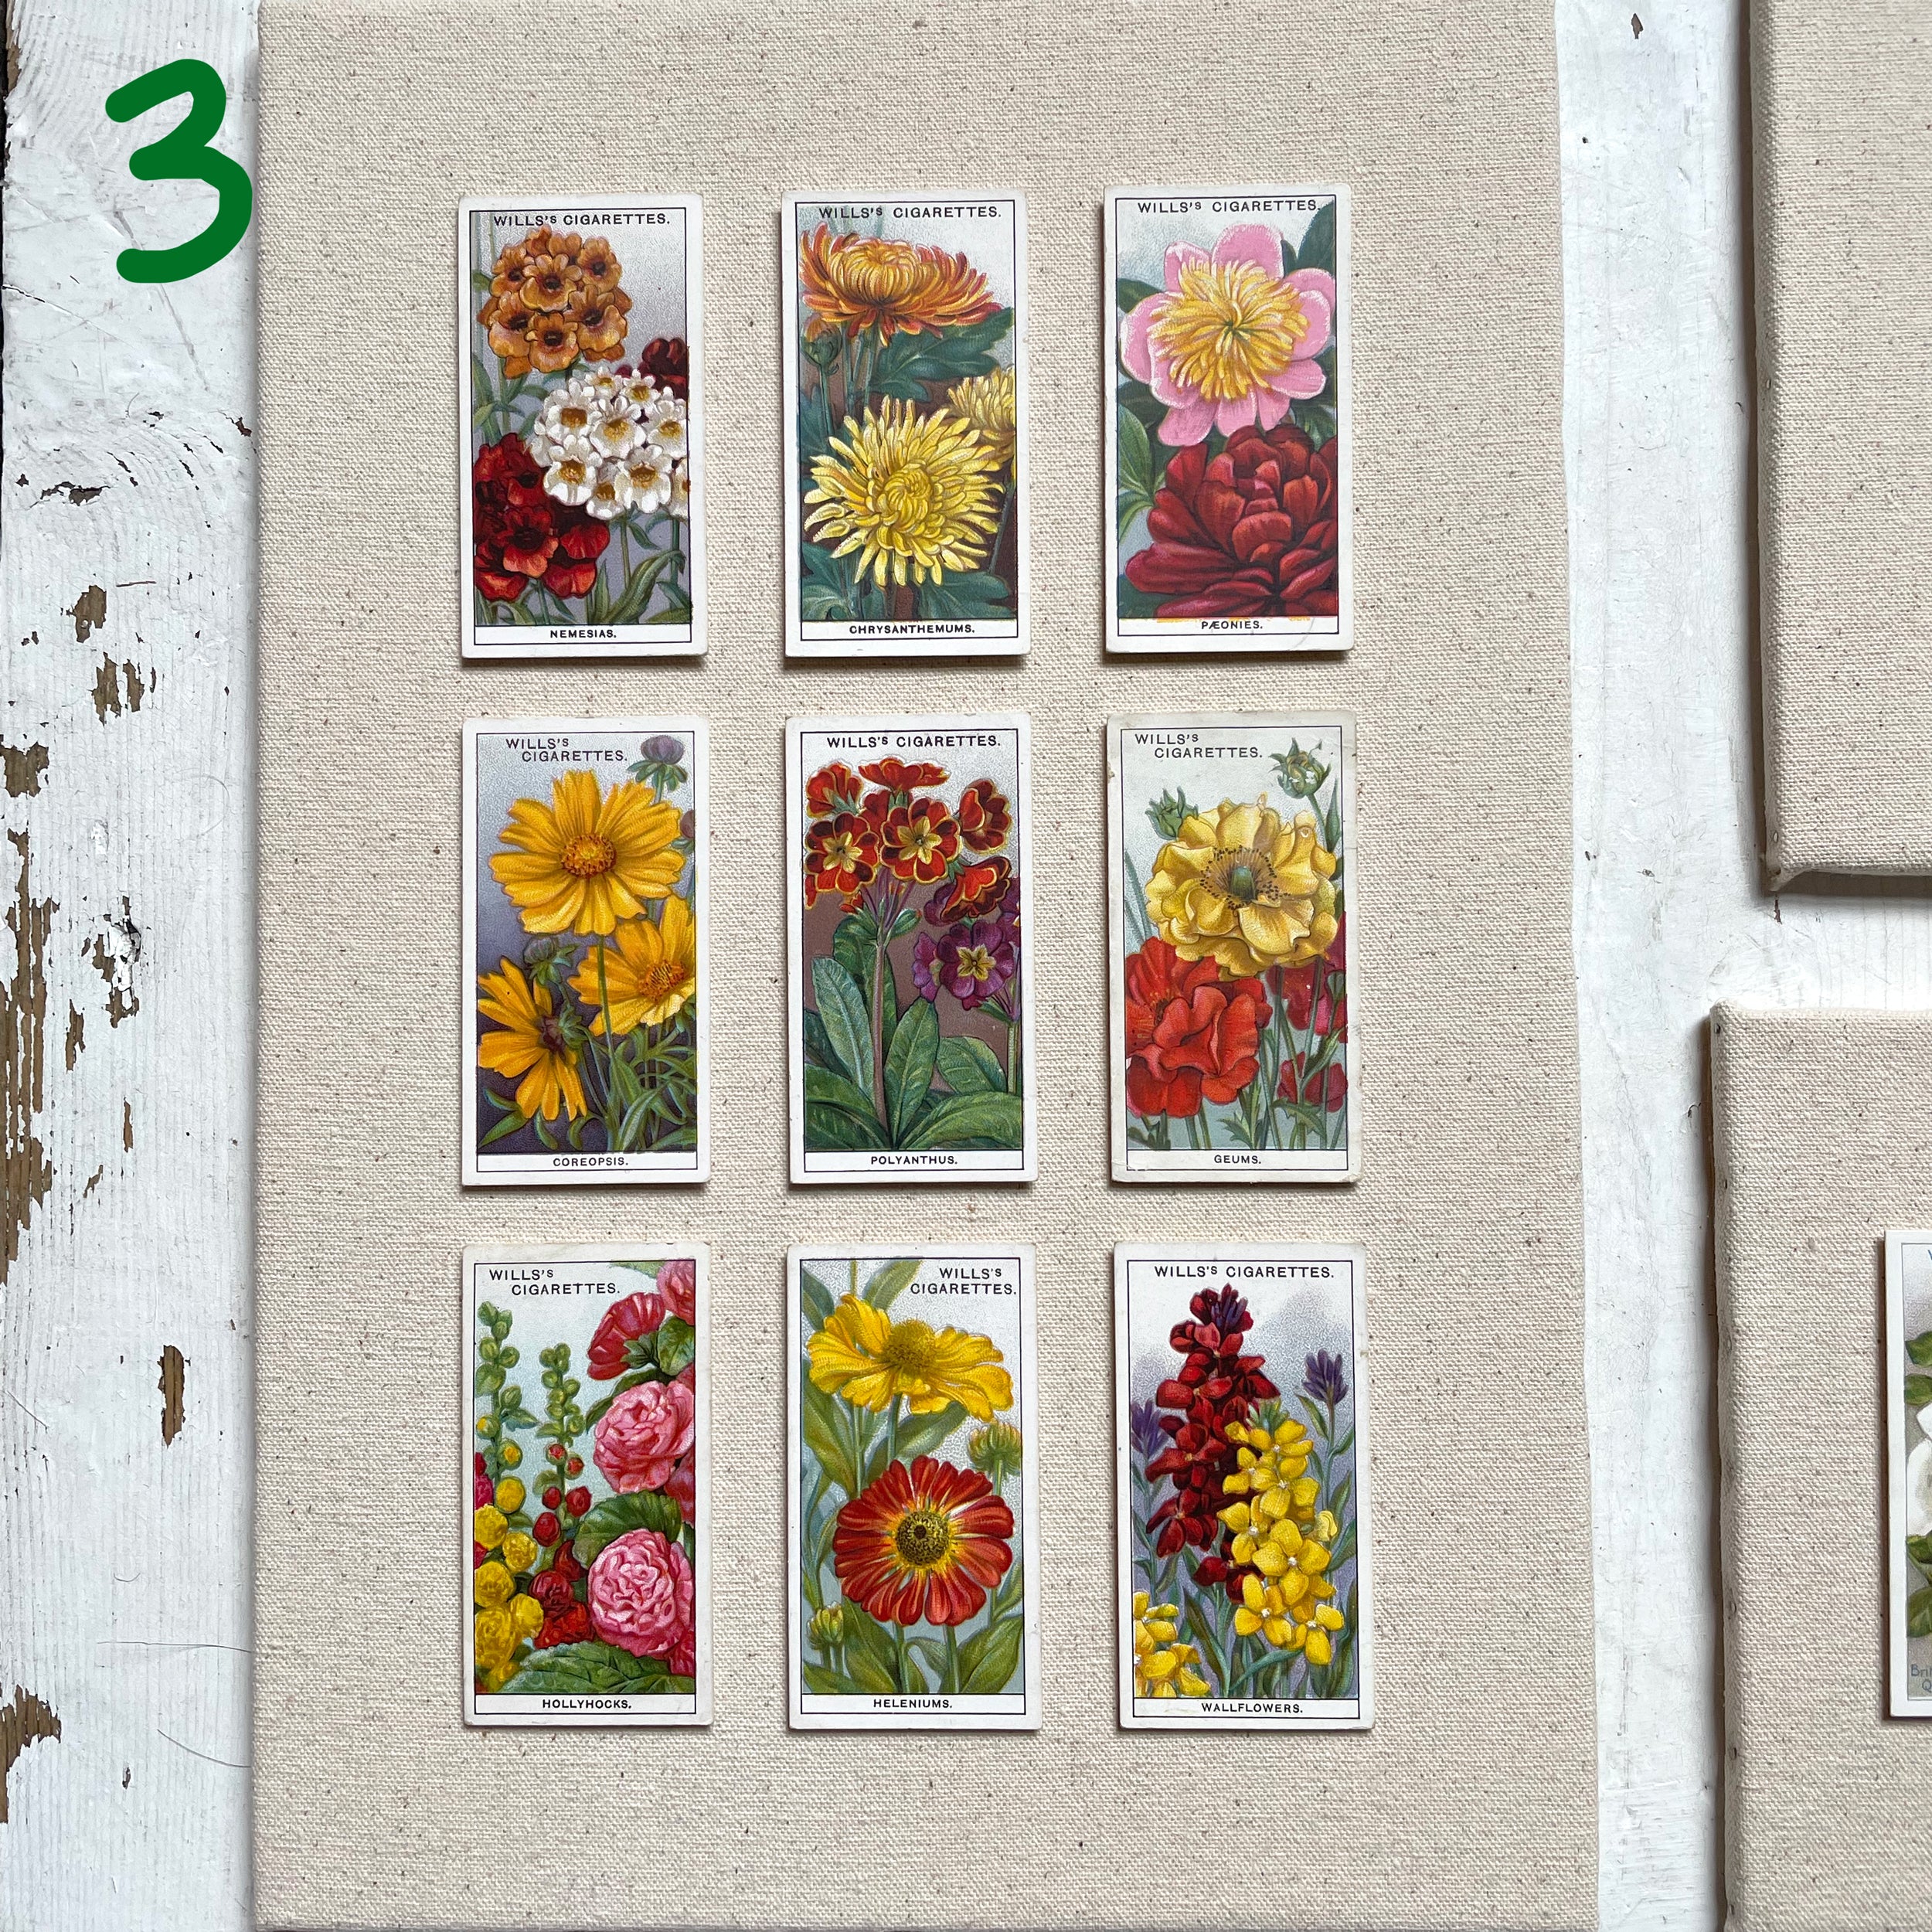 DISCONTINUED – Collectors Card Artwork (Unframed) – Garden Flowers & Roses